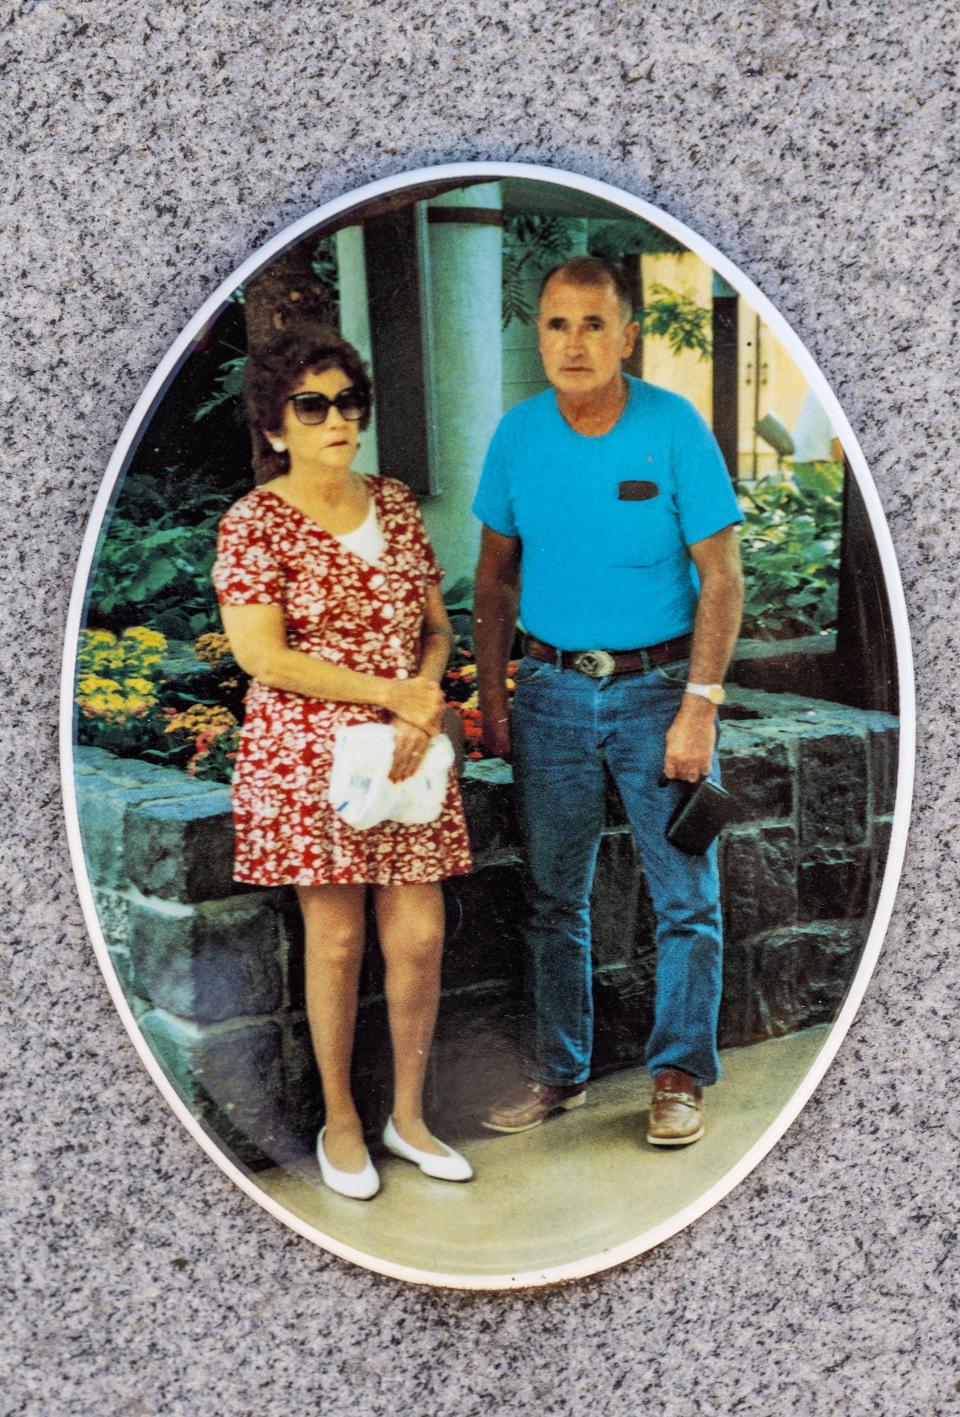 This photo of Anna Studey and her husband, Donald Studey, appears on her gravestone, near Thurman. According to his daughter, Donald Dean Studey murdered "five or six" women a year and buried them in and around an abandoned well on his property.